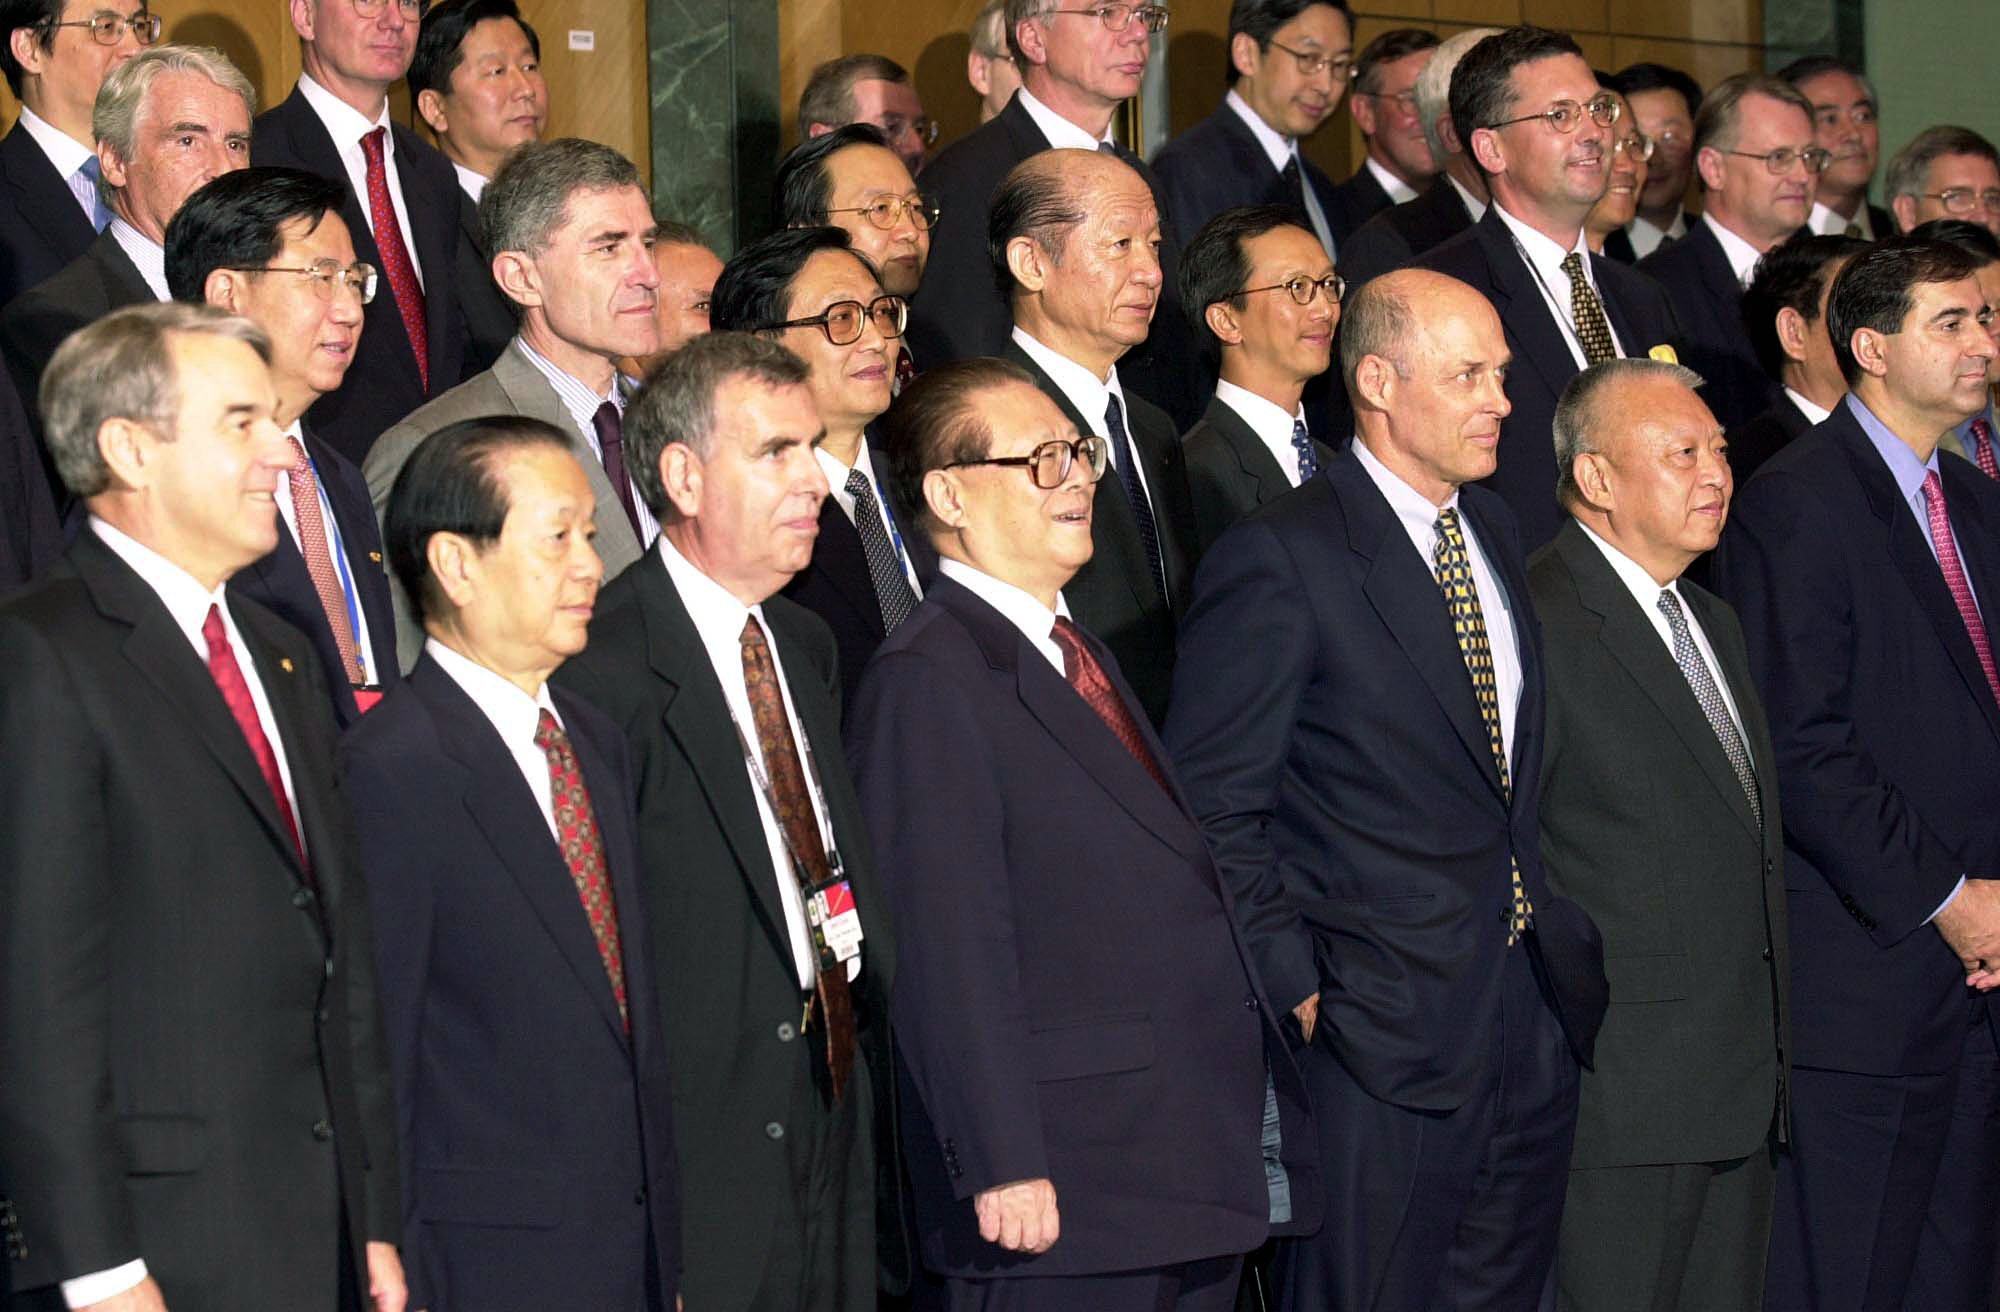 Then-president Jiang Zemin (front row, centre) and chief executive Tung Chee-hwa (front row, second from right) take part in a photo session with delegates at the Fortune Global Forum on May 8, 2001, at the Hong Kong Convention and Exhibition Centre. Photo: Handout